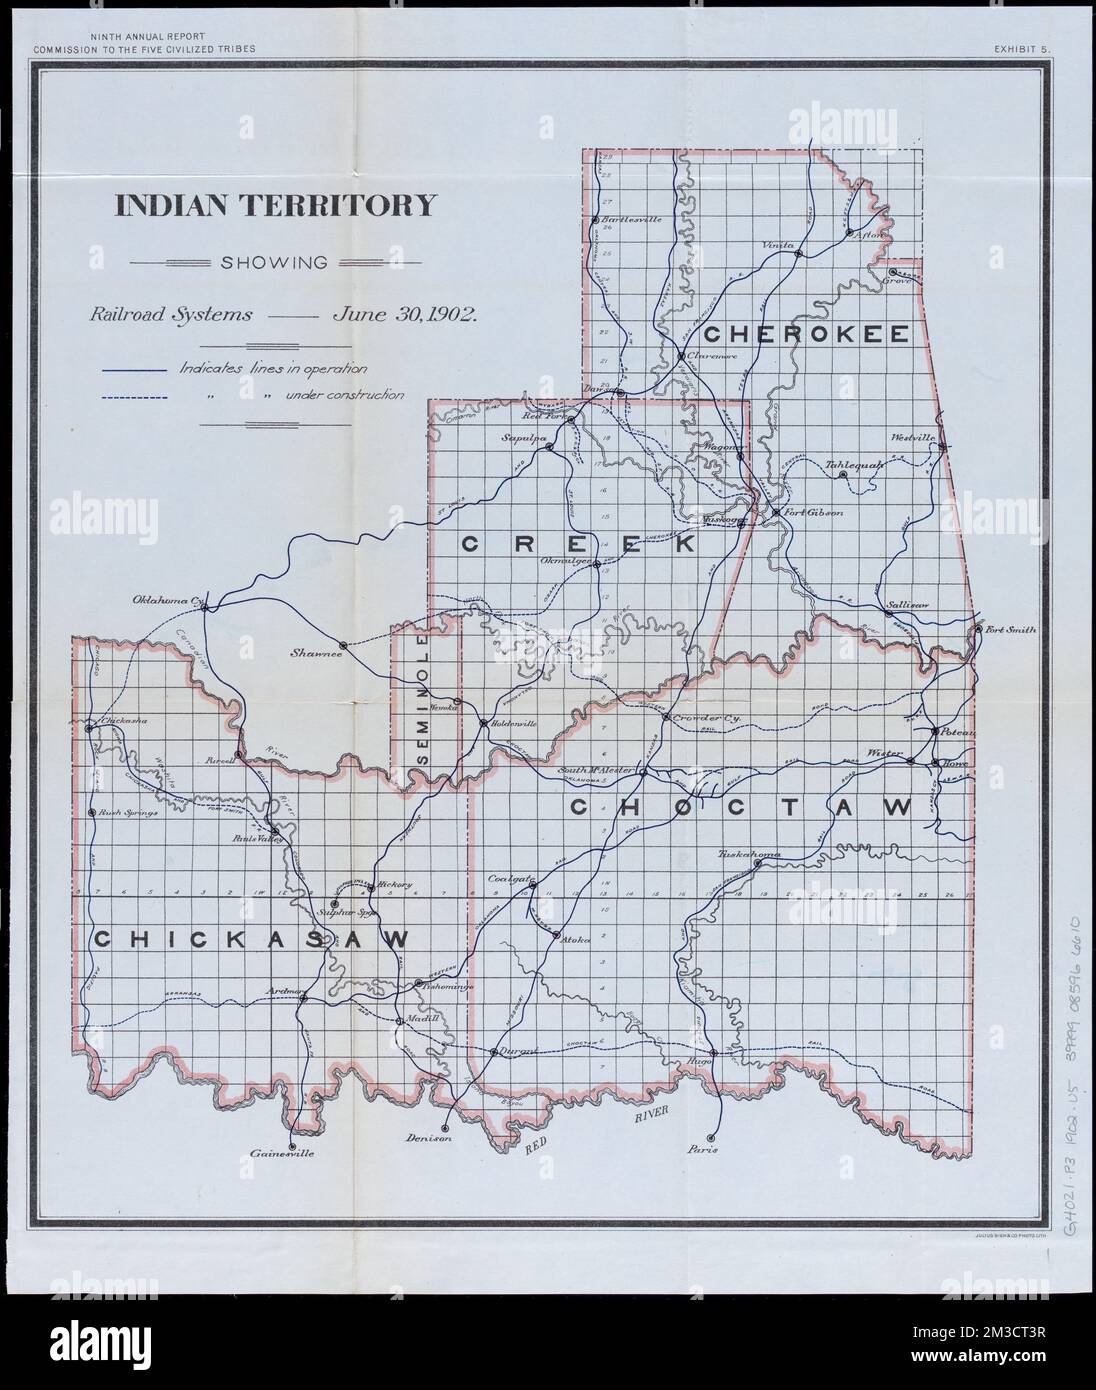 Indian Territory showing railroad systems - June 30, 1902 , Indian Territory, Maps, Oklahoma, Maps, Railroads, Indian Territory, Maps, Railroads, Oklahoma, Maps, Indian reservations, Oklahoma, Maps Norman B. Leventhal Map Center Collection Stock Photo